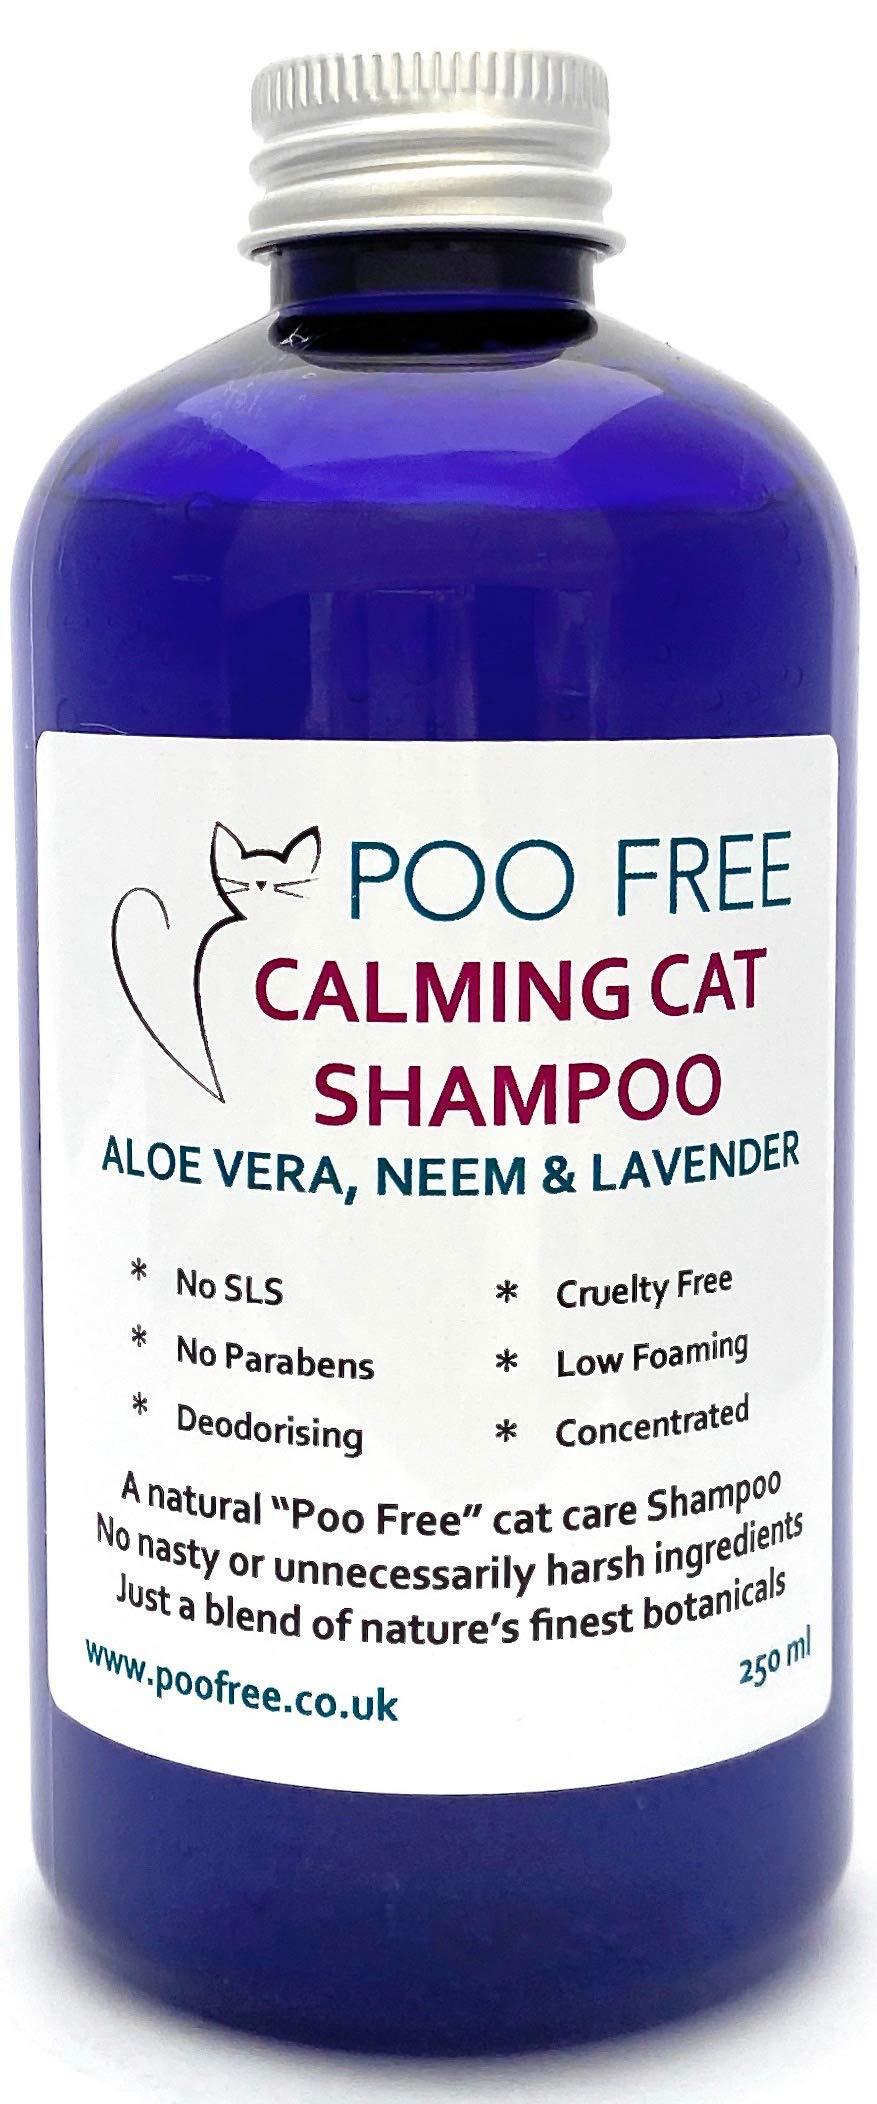 Natural CALMING SHAMPOO FOR CATS - ALOE VERA, NEEM & LAVENDER - 250ml - by POO FREE - No Sulfates, No Parabens, No Silicones. Soothes, Relieves Itchiness, Eliminates Germs and Smells. Concentrated. - PawsPlanet Australia